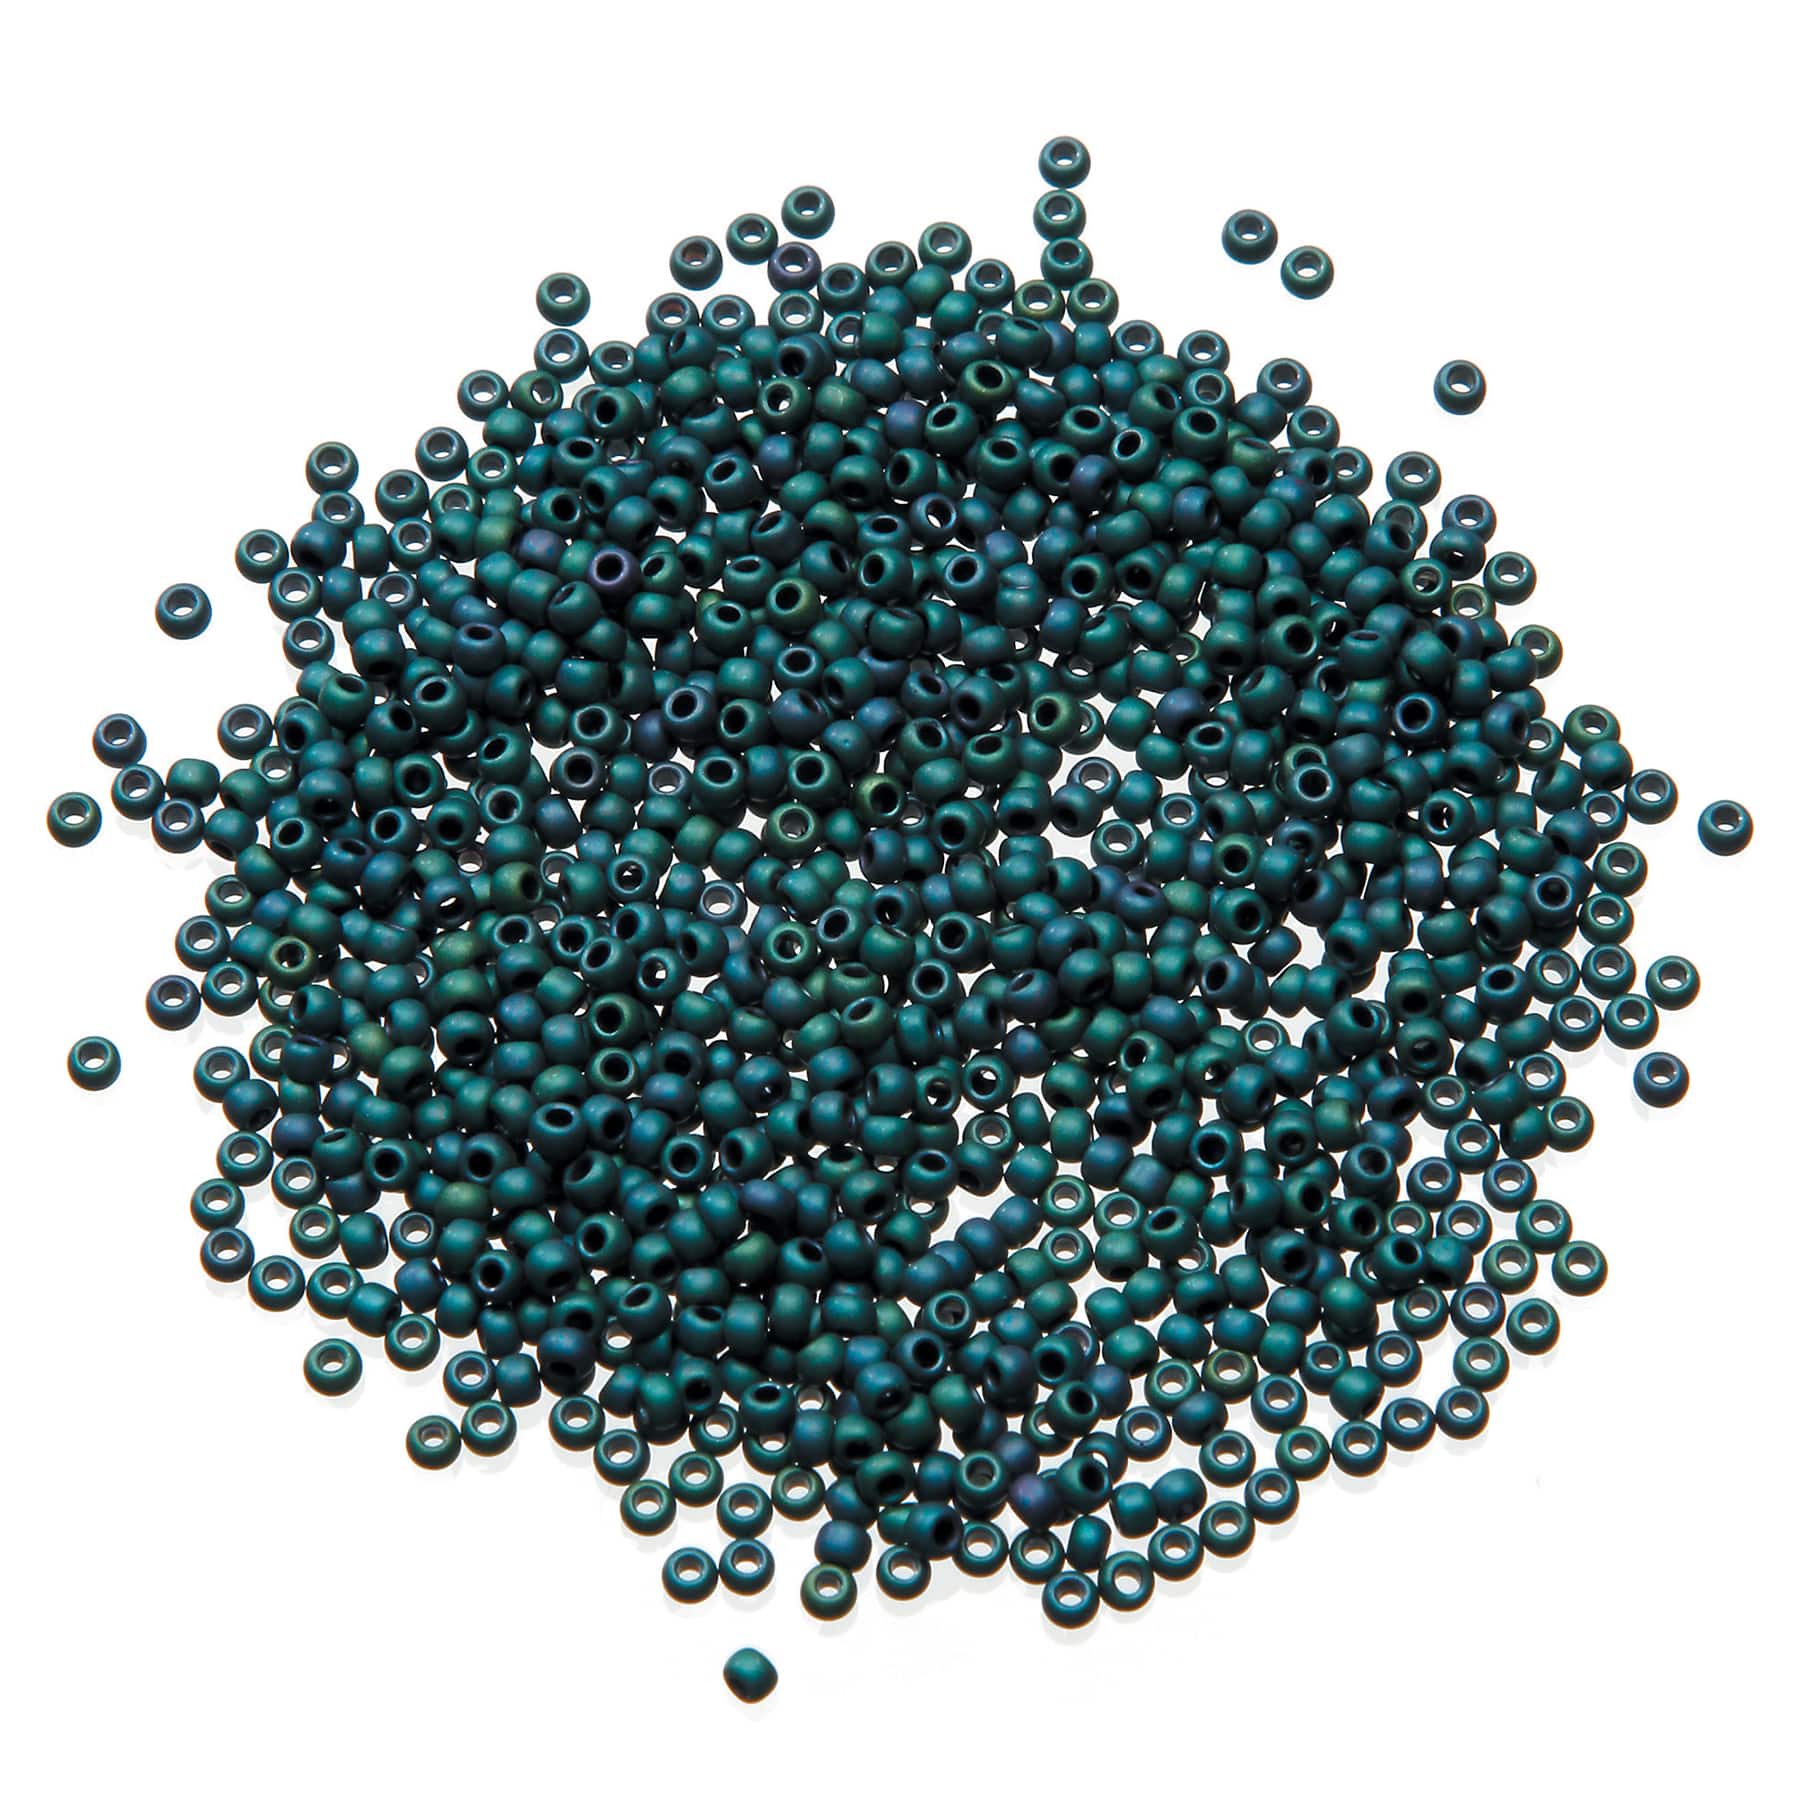 Darice - Glass Seed Beads Size 10/0 - Opaque Black